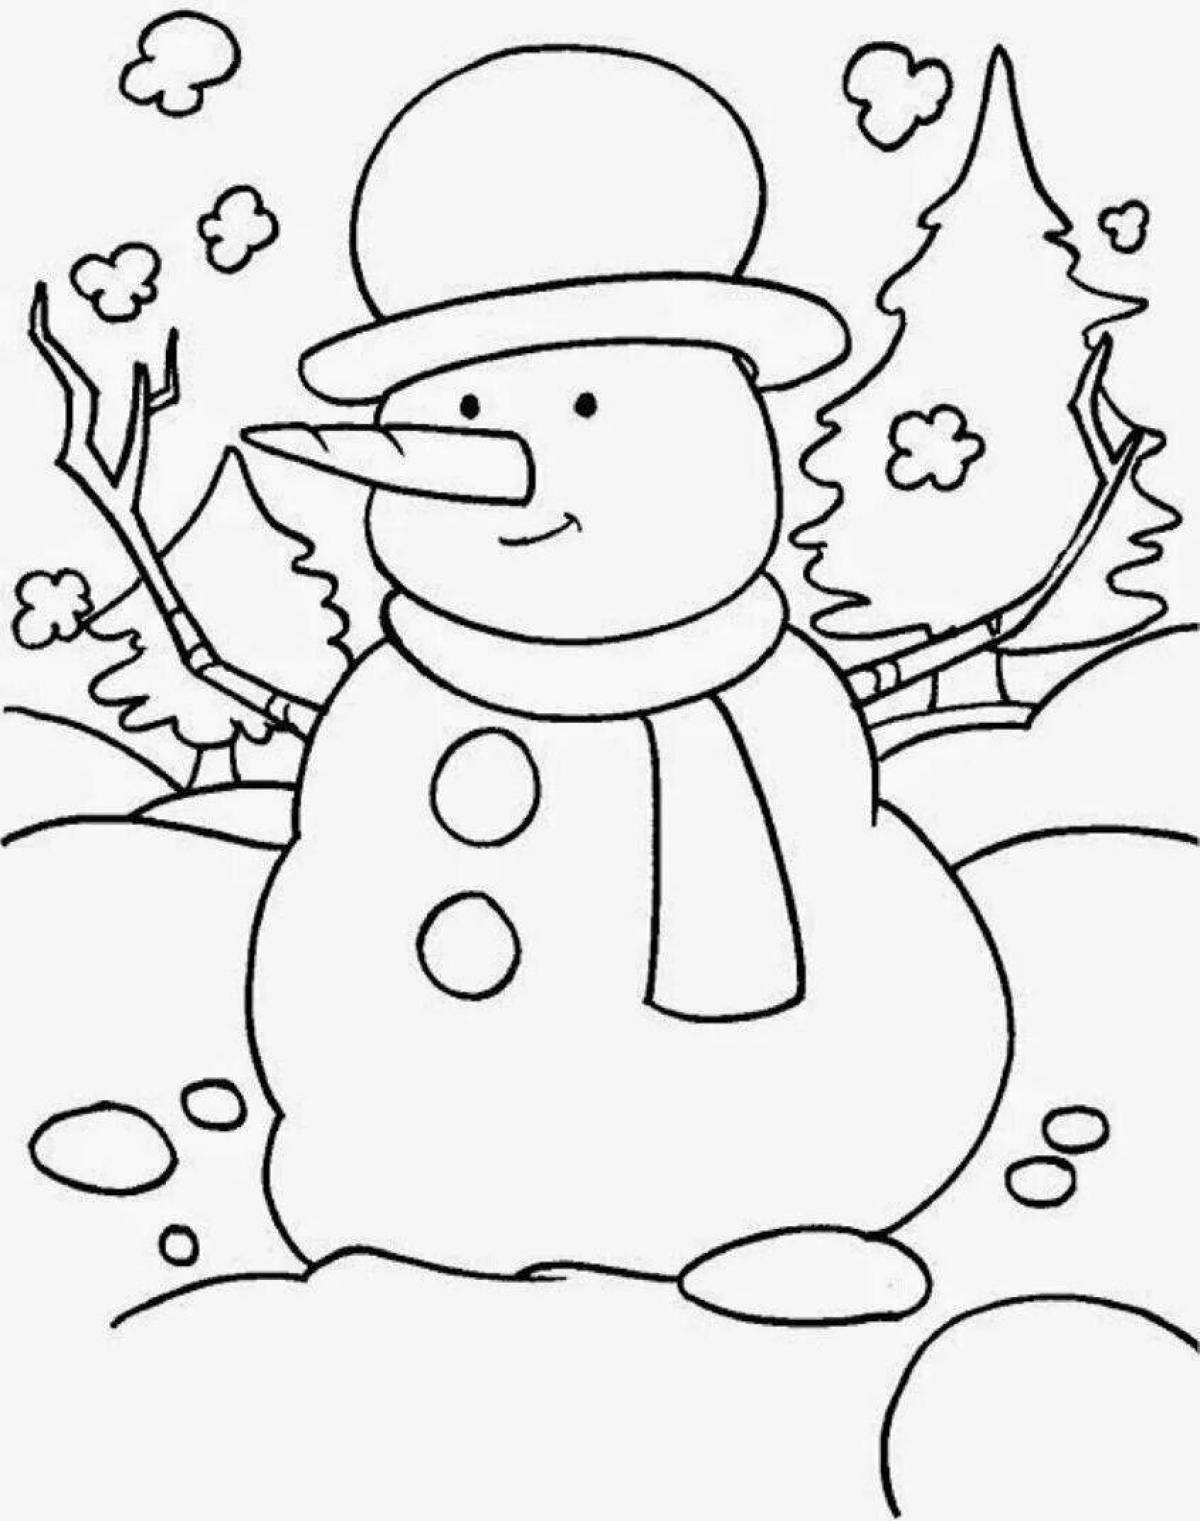 Happy snowman day coloring page